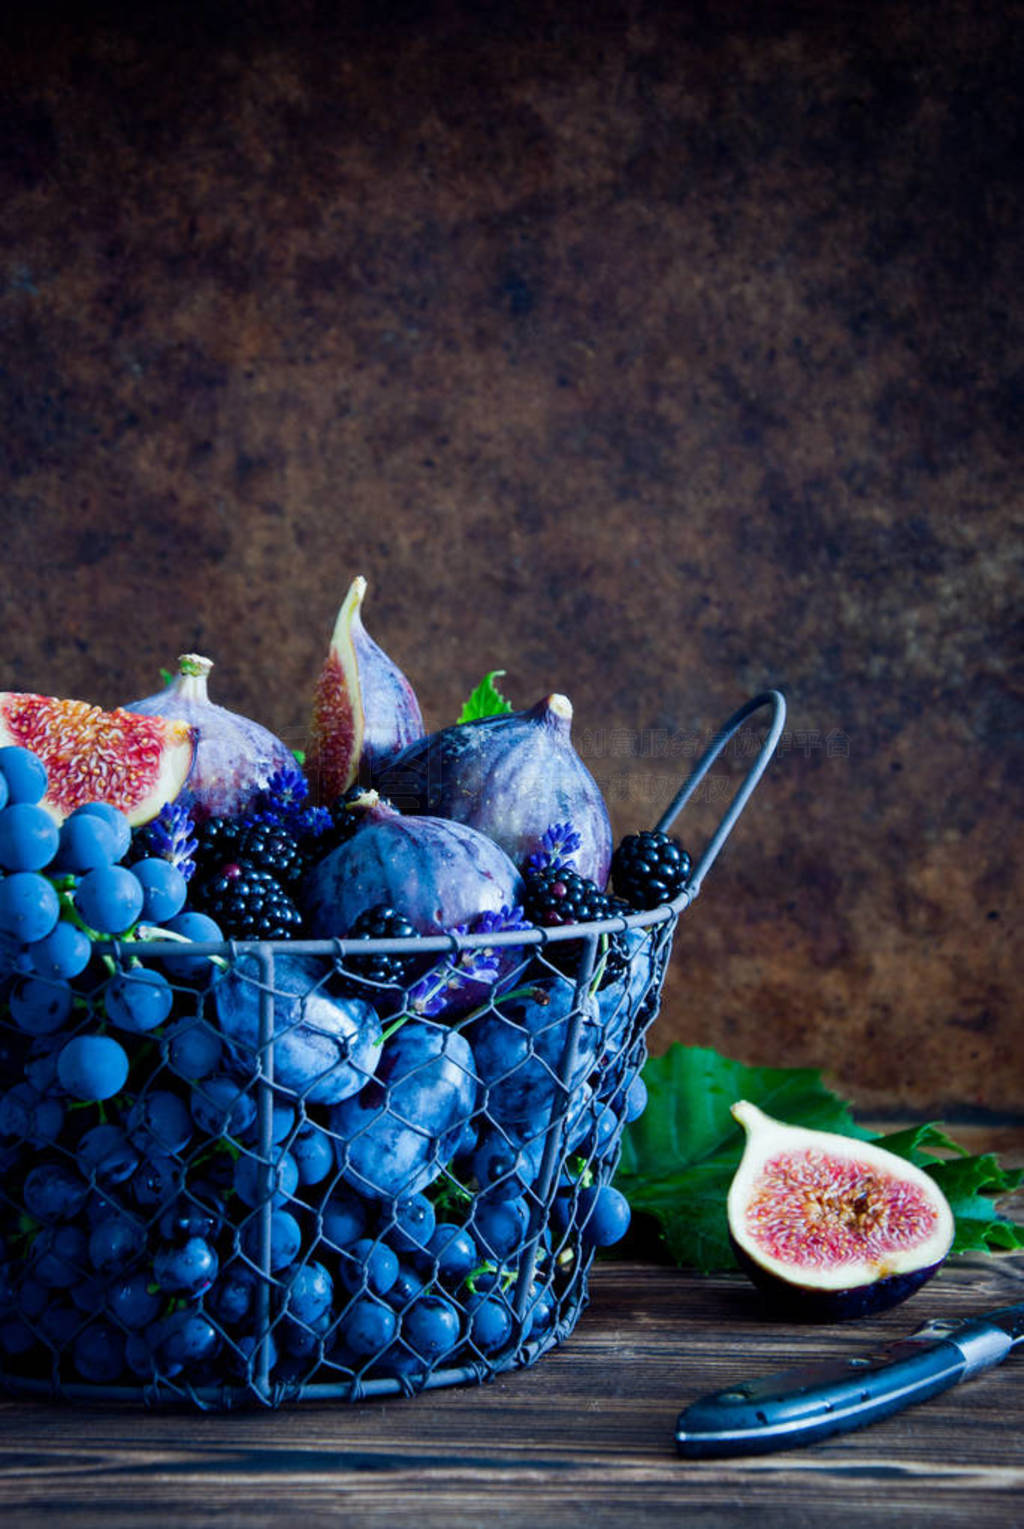 Fresh figs, grapes, prunes and dewberry in a metal basket